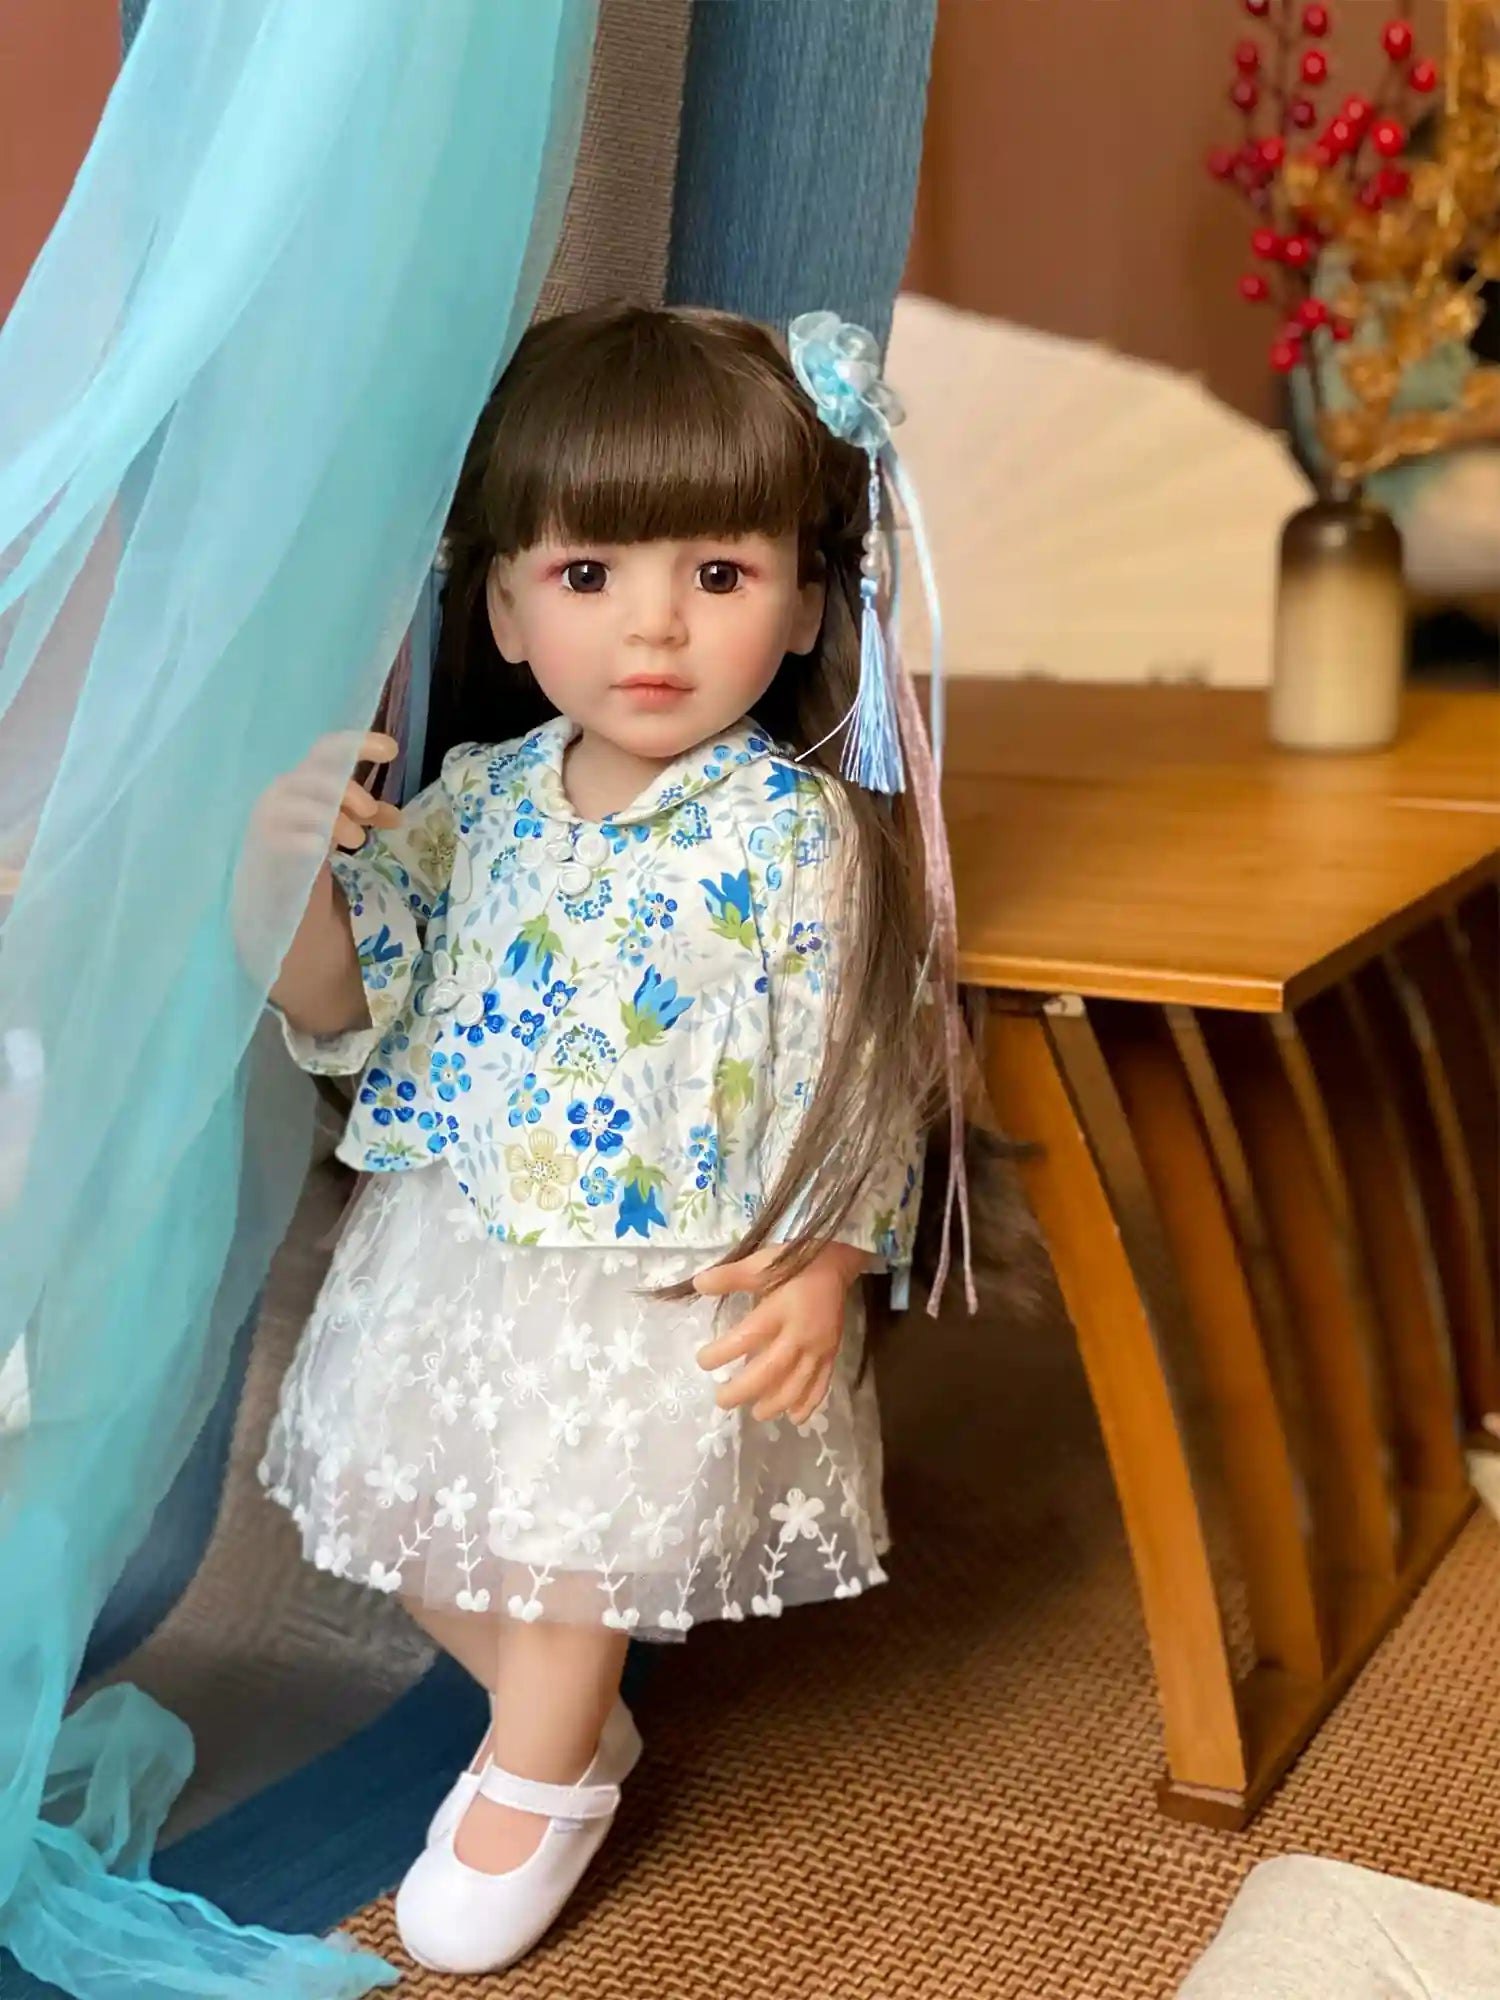 Toddler doll seated with blue floral dress and white shoes, accessorized with blue hair ribbons, against a home interior backdrop.